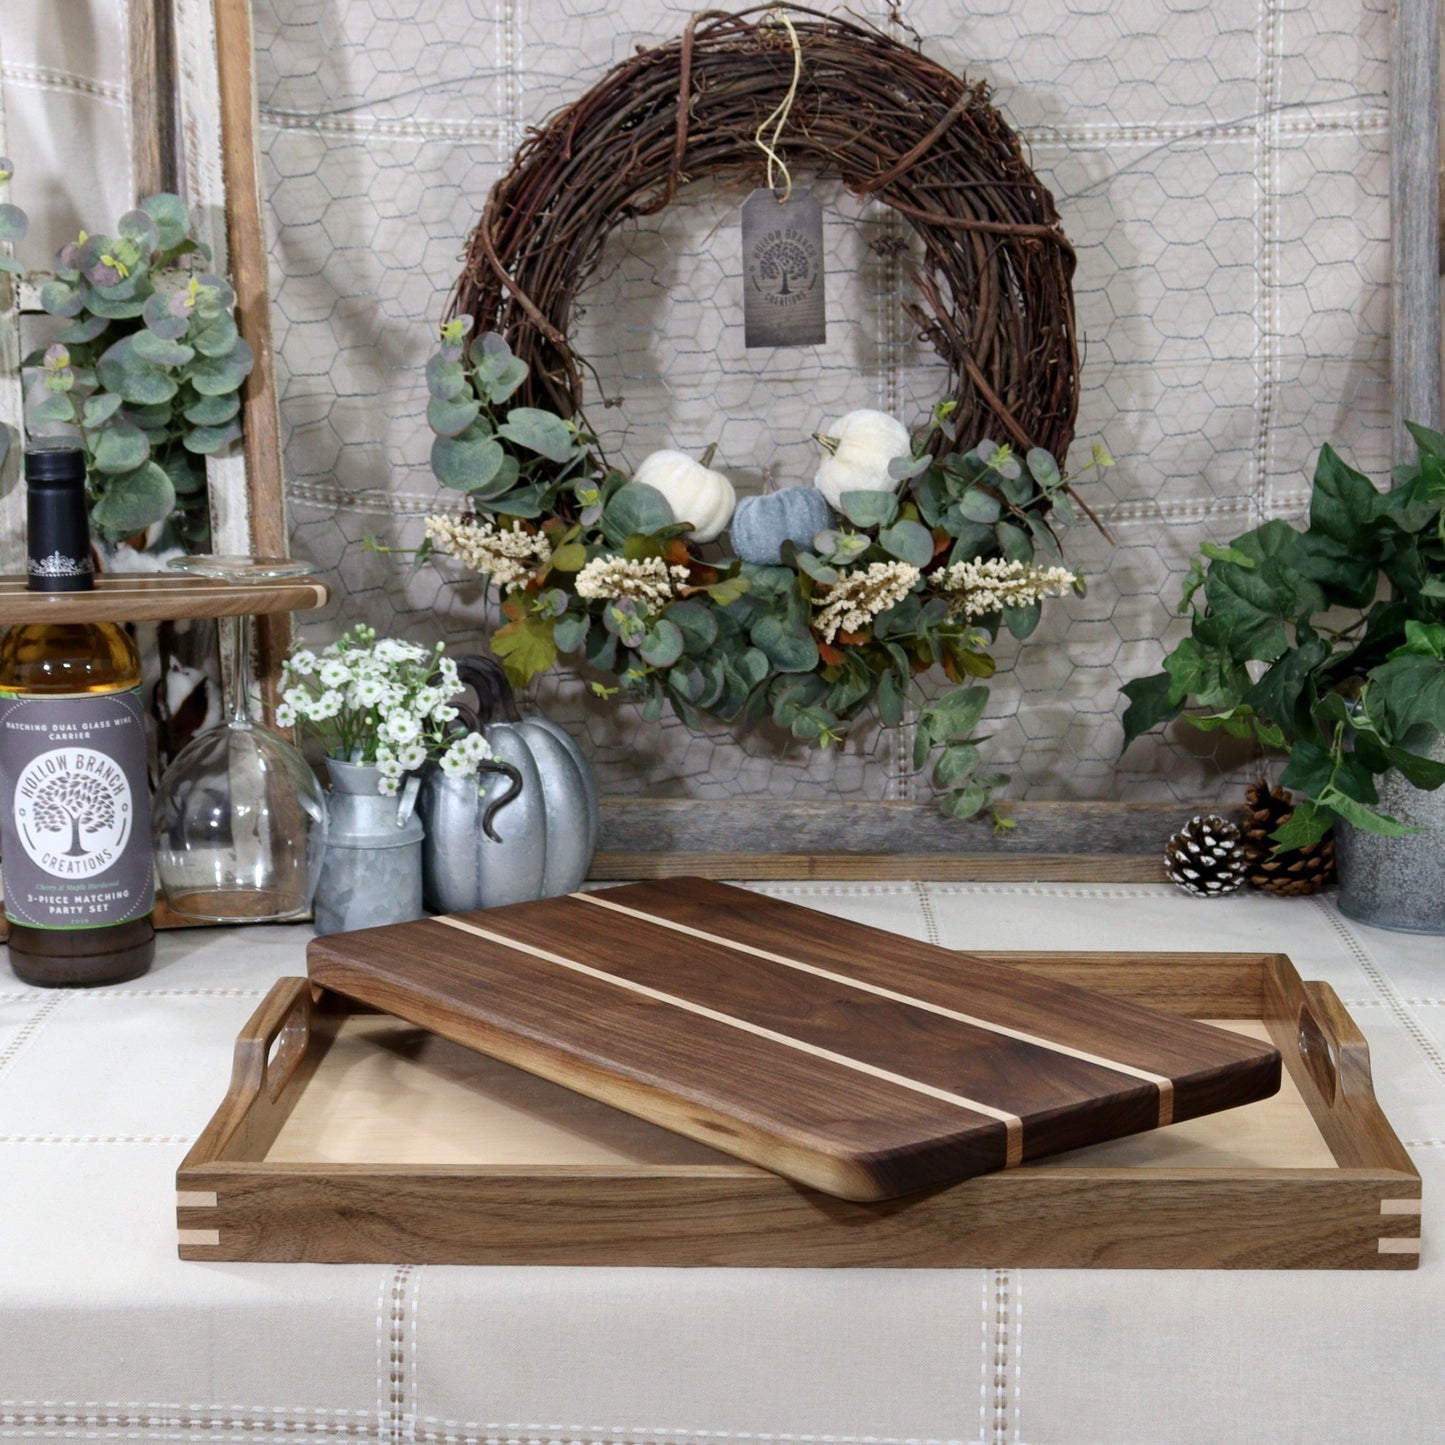 Walnut & Maple Wooden Serving Tray with handles